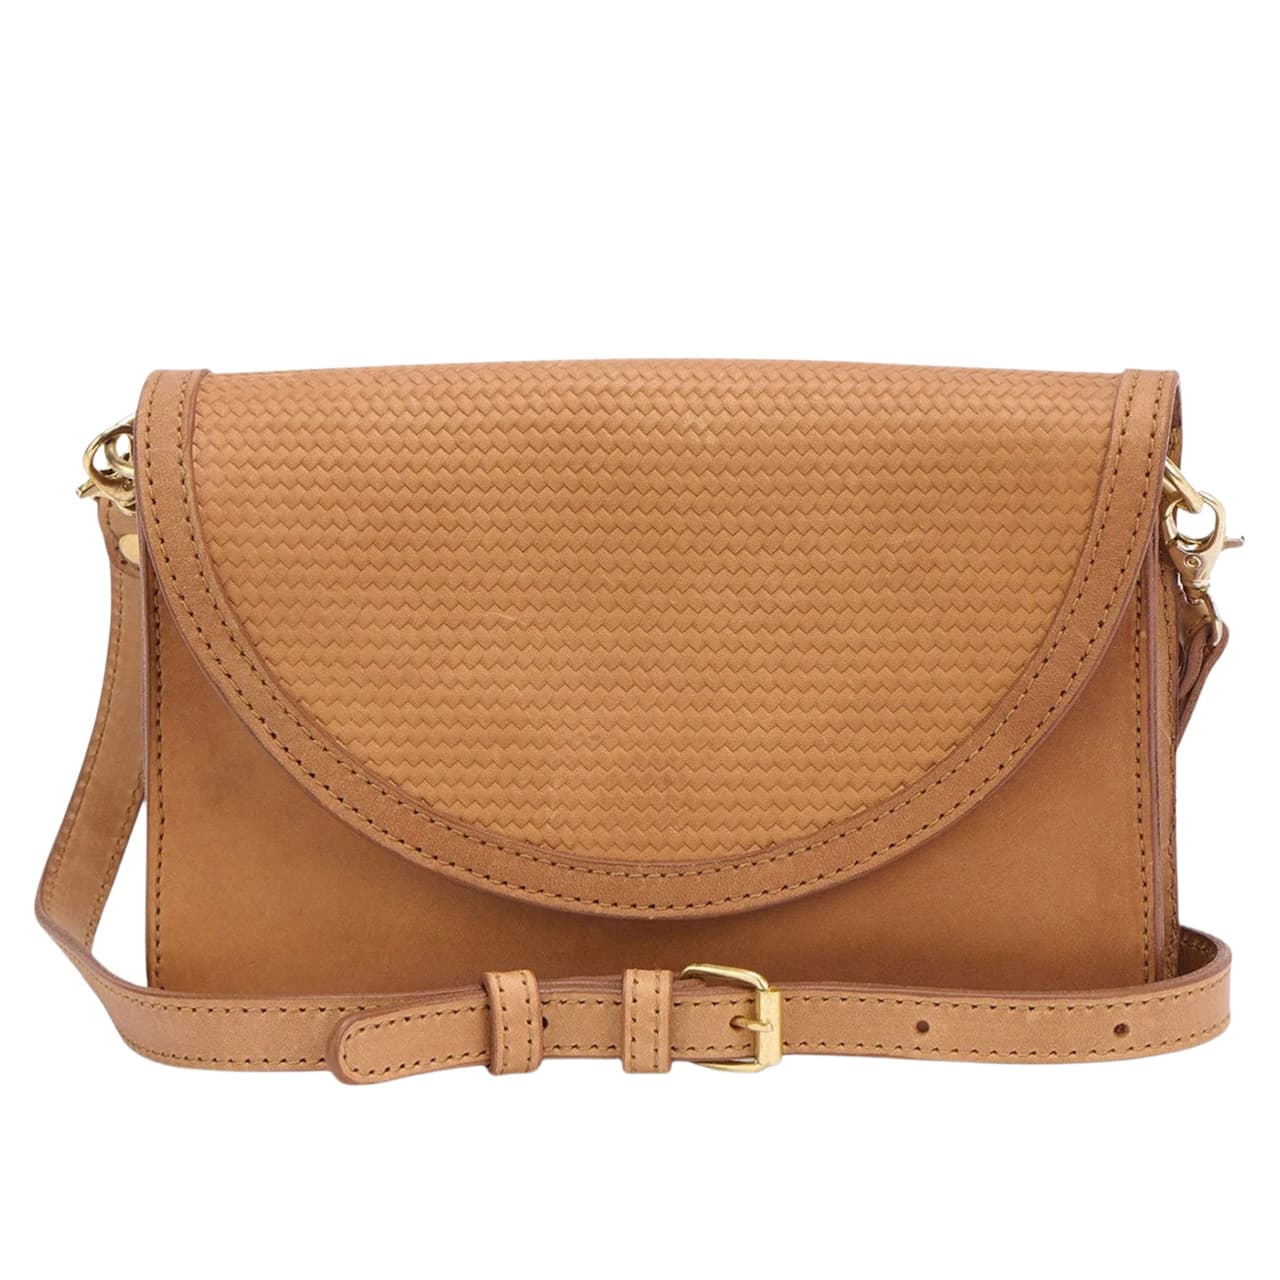 13 Cross-body Bags Perfect For Every Occasion